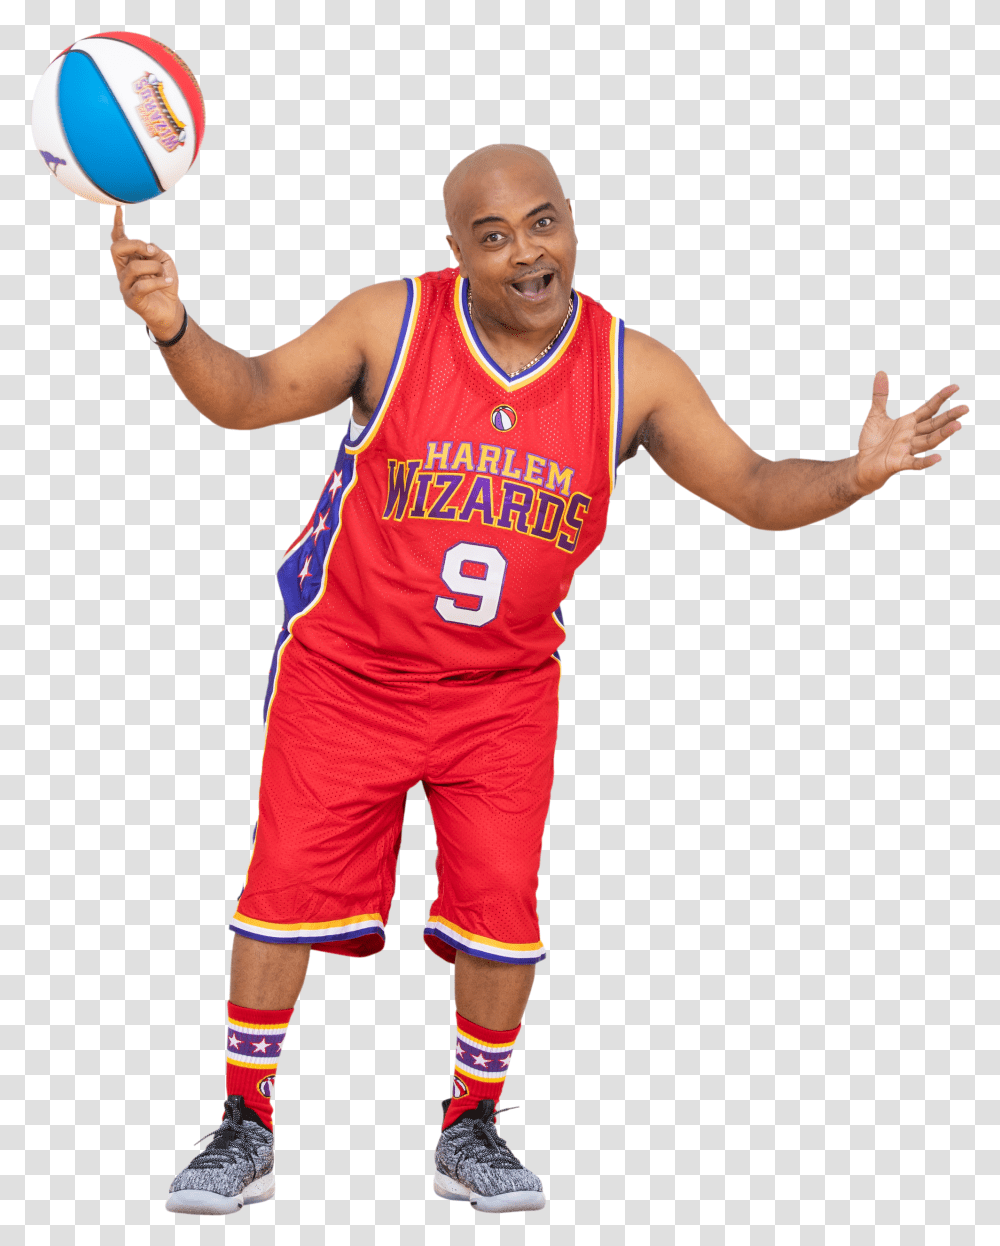 Wizardpng Atrain Basketball Moves 2117450 Vippng Player, Person, People, Clothing, Team Sport Transparent Png